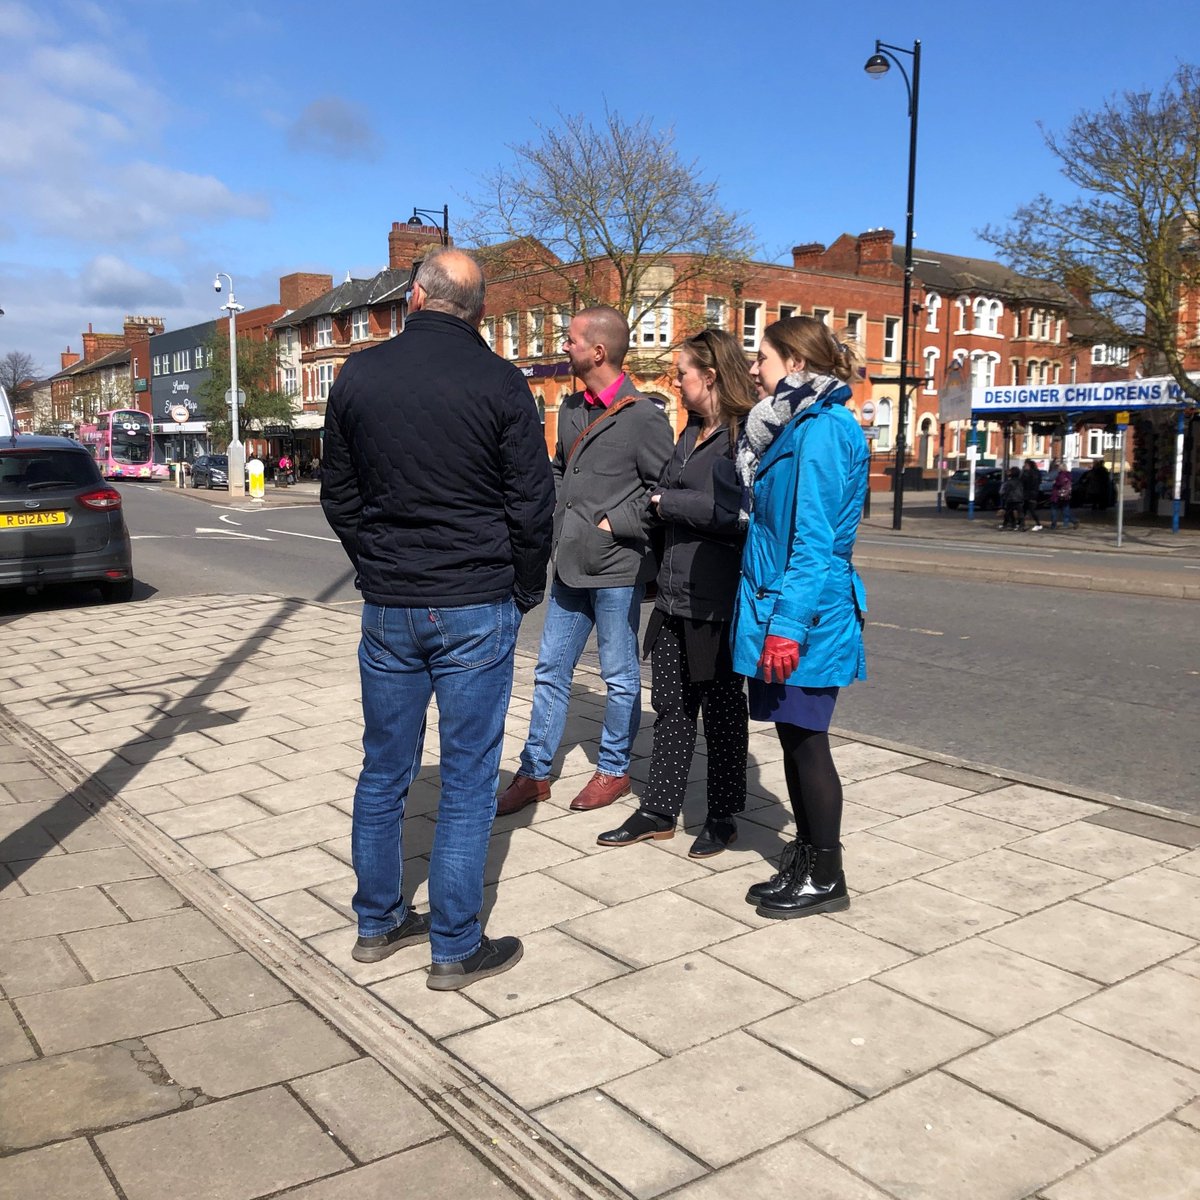 Last week Tracy and Alice visited #Skegness and #Mablethorpe alongside colleagues from @ConnectedCoastL  and @EastLindseyDC to discuss our ongoing work in the area

#TownsFund #MidlandsEngine @luhc